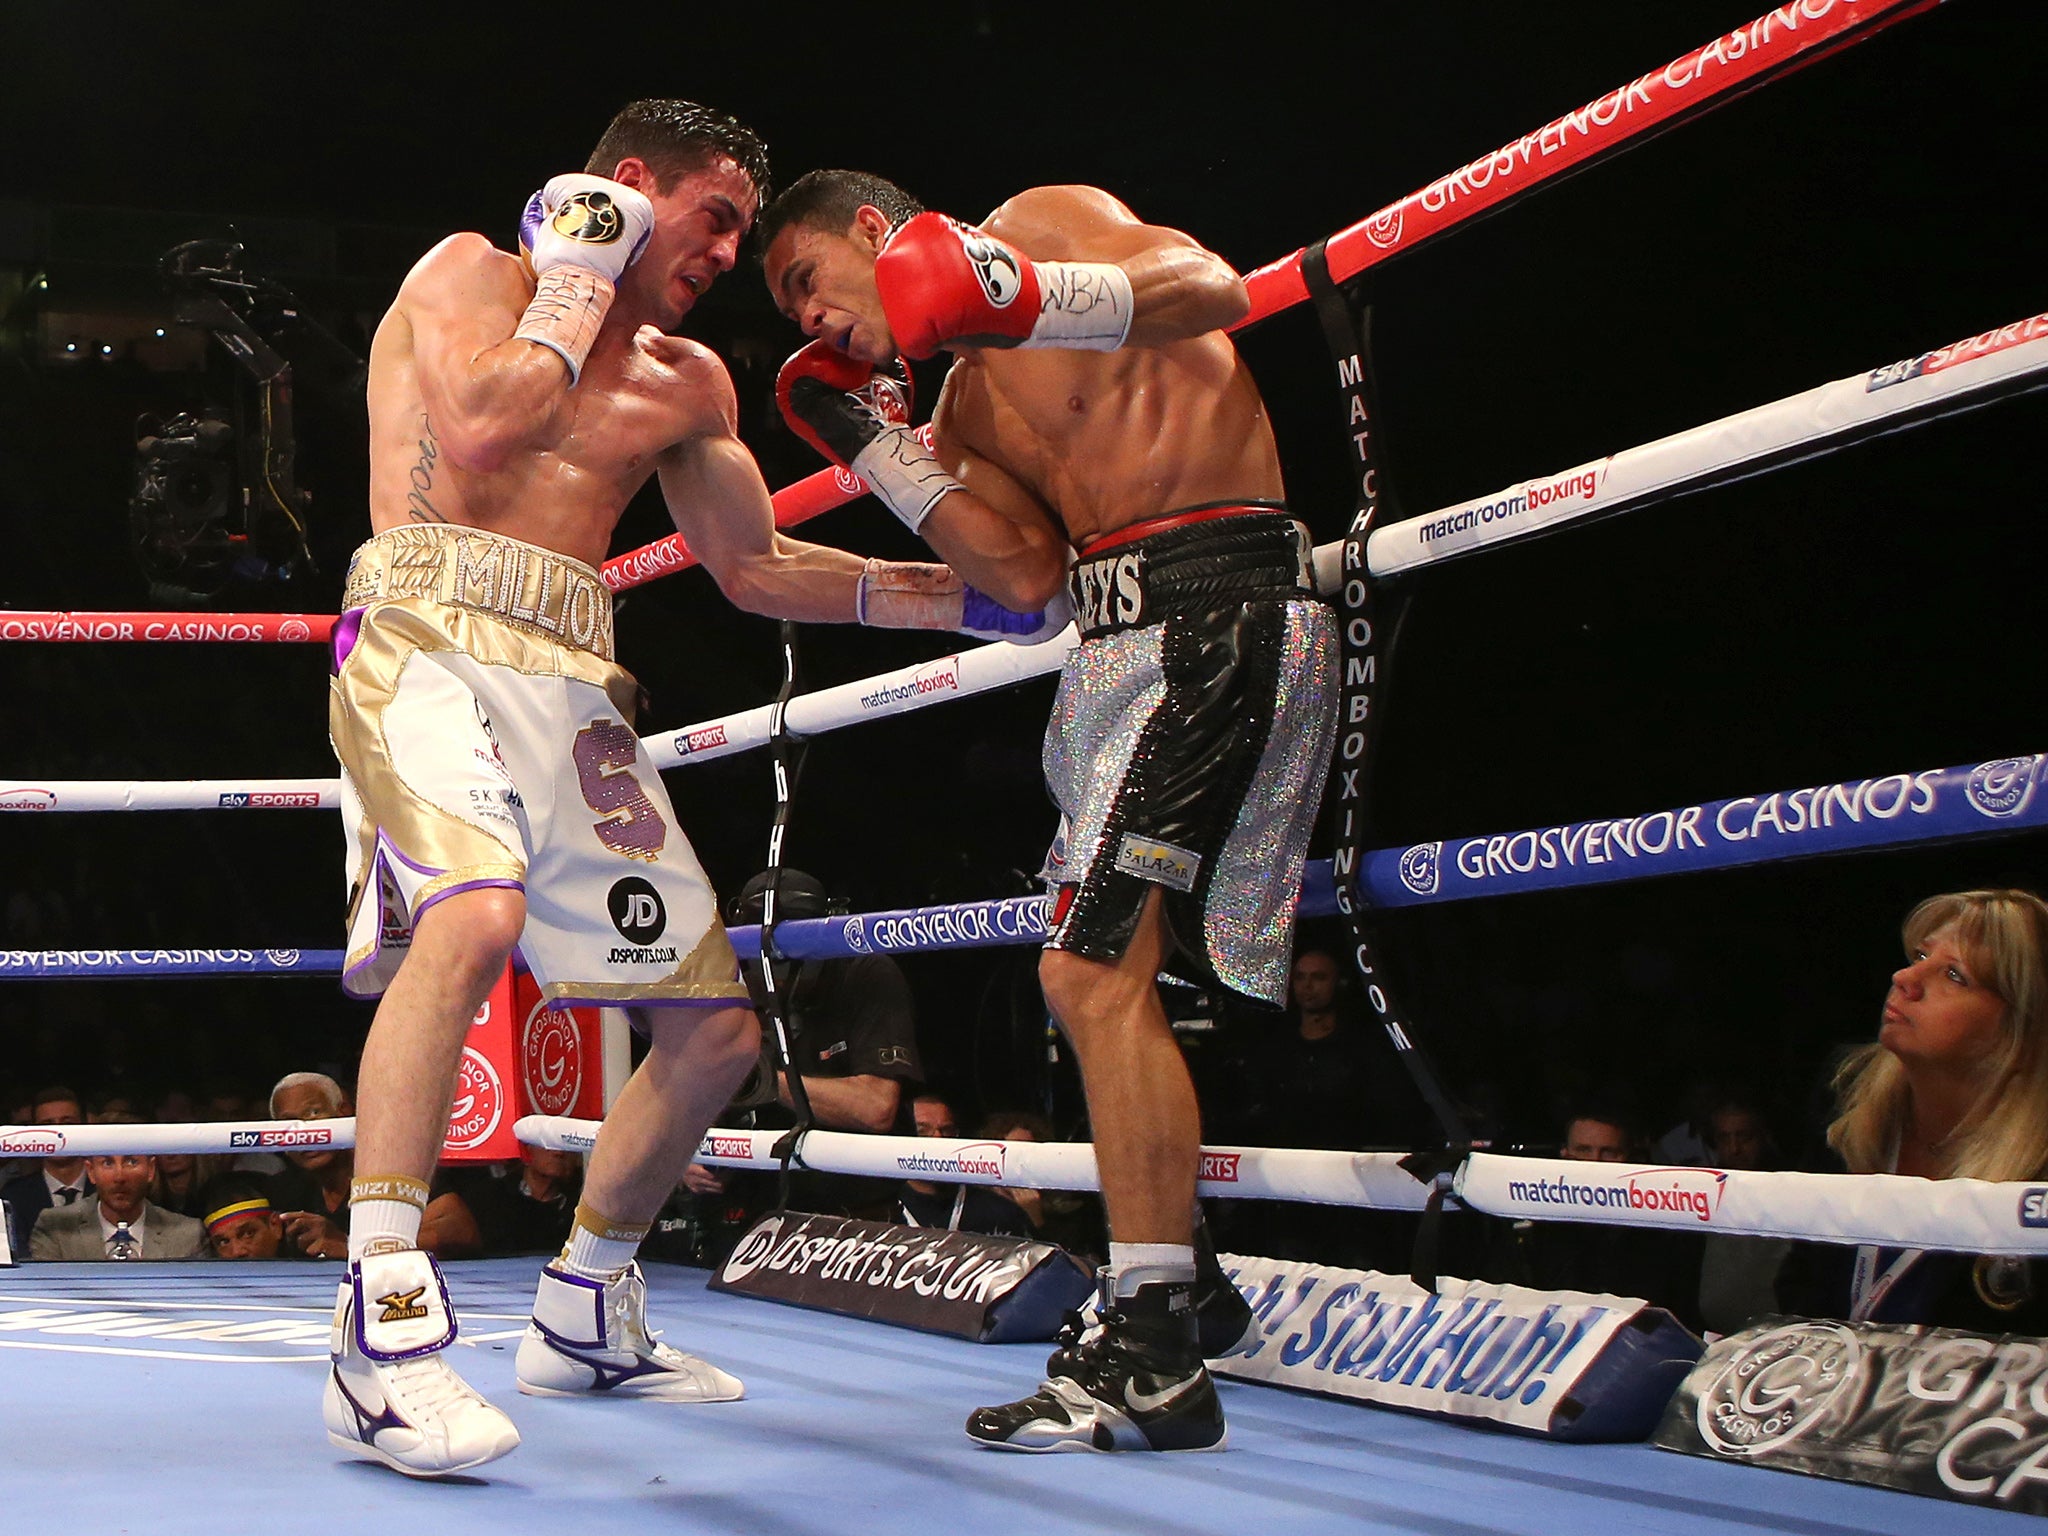 &#13;
Anthony Crolla lands his body punch on Darleys Perez to win the WBA title&#13;